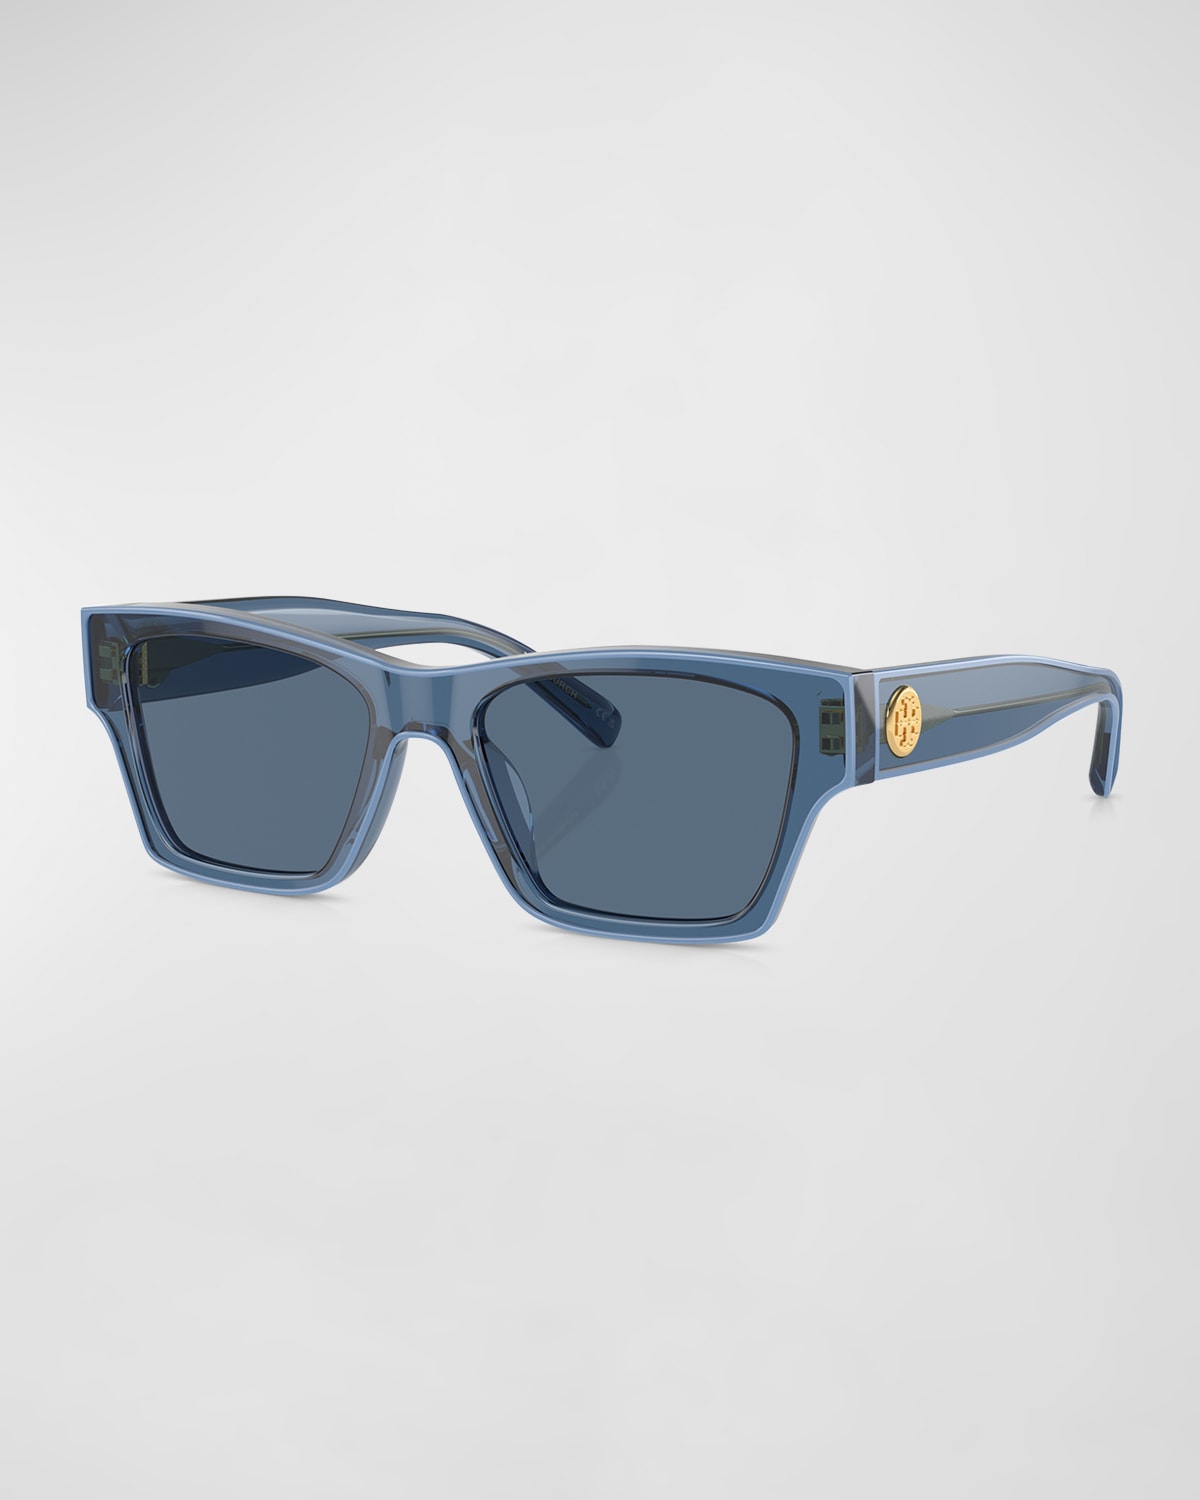 Tory Burch Outlined Rectangle Sunglasses In Dark Blue